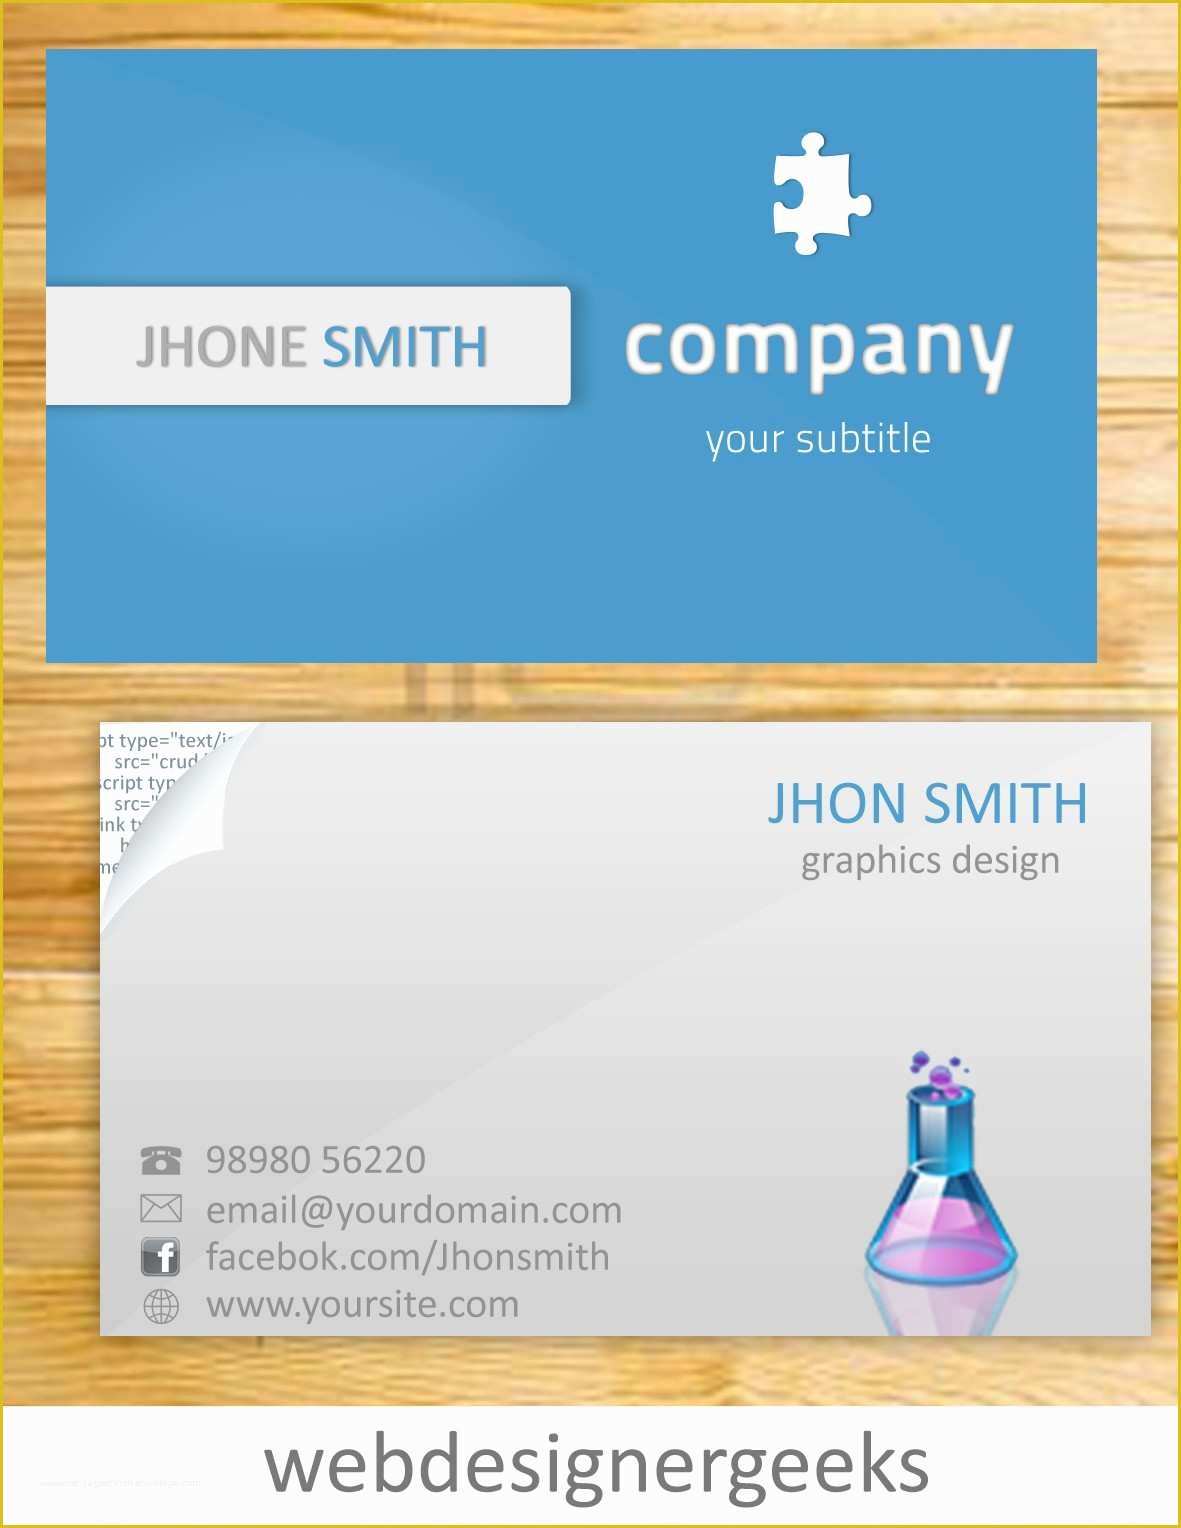 Business Card Template Illustrator Free Of Elegant Vistaprint Postcard Template Illustrator